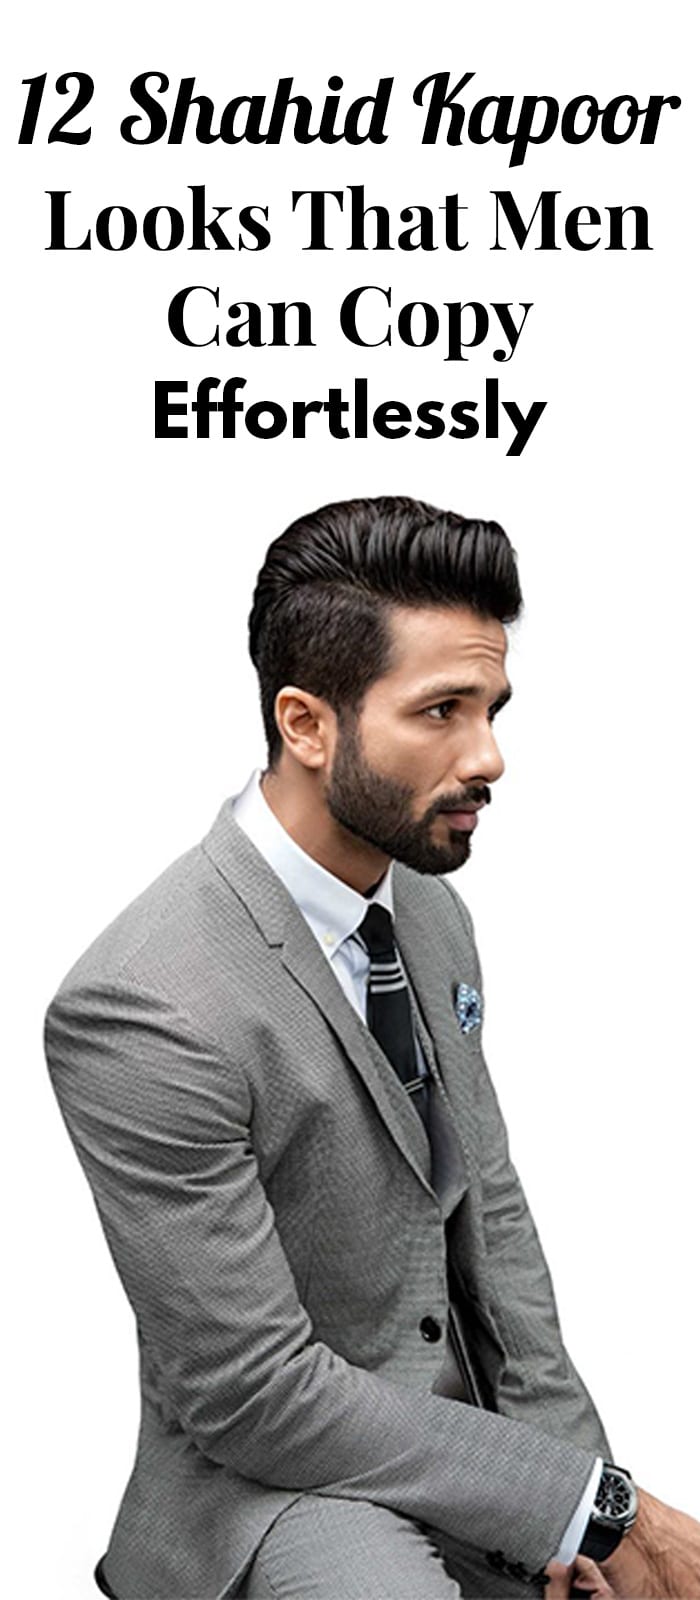 12 Shahid Kapoor Looks That Men Can Copy Effortlessly.